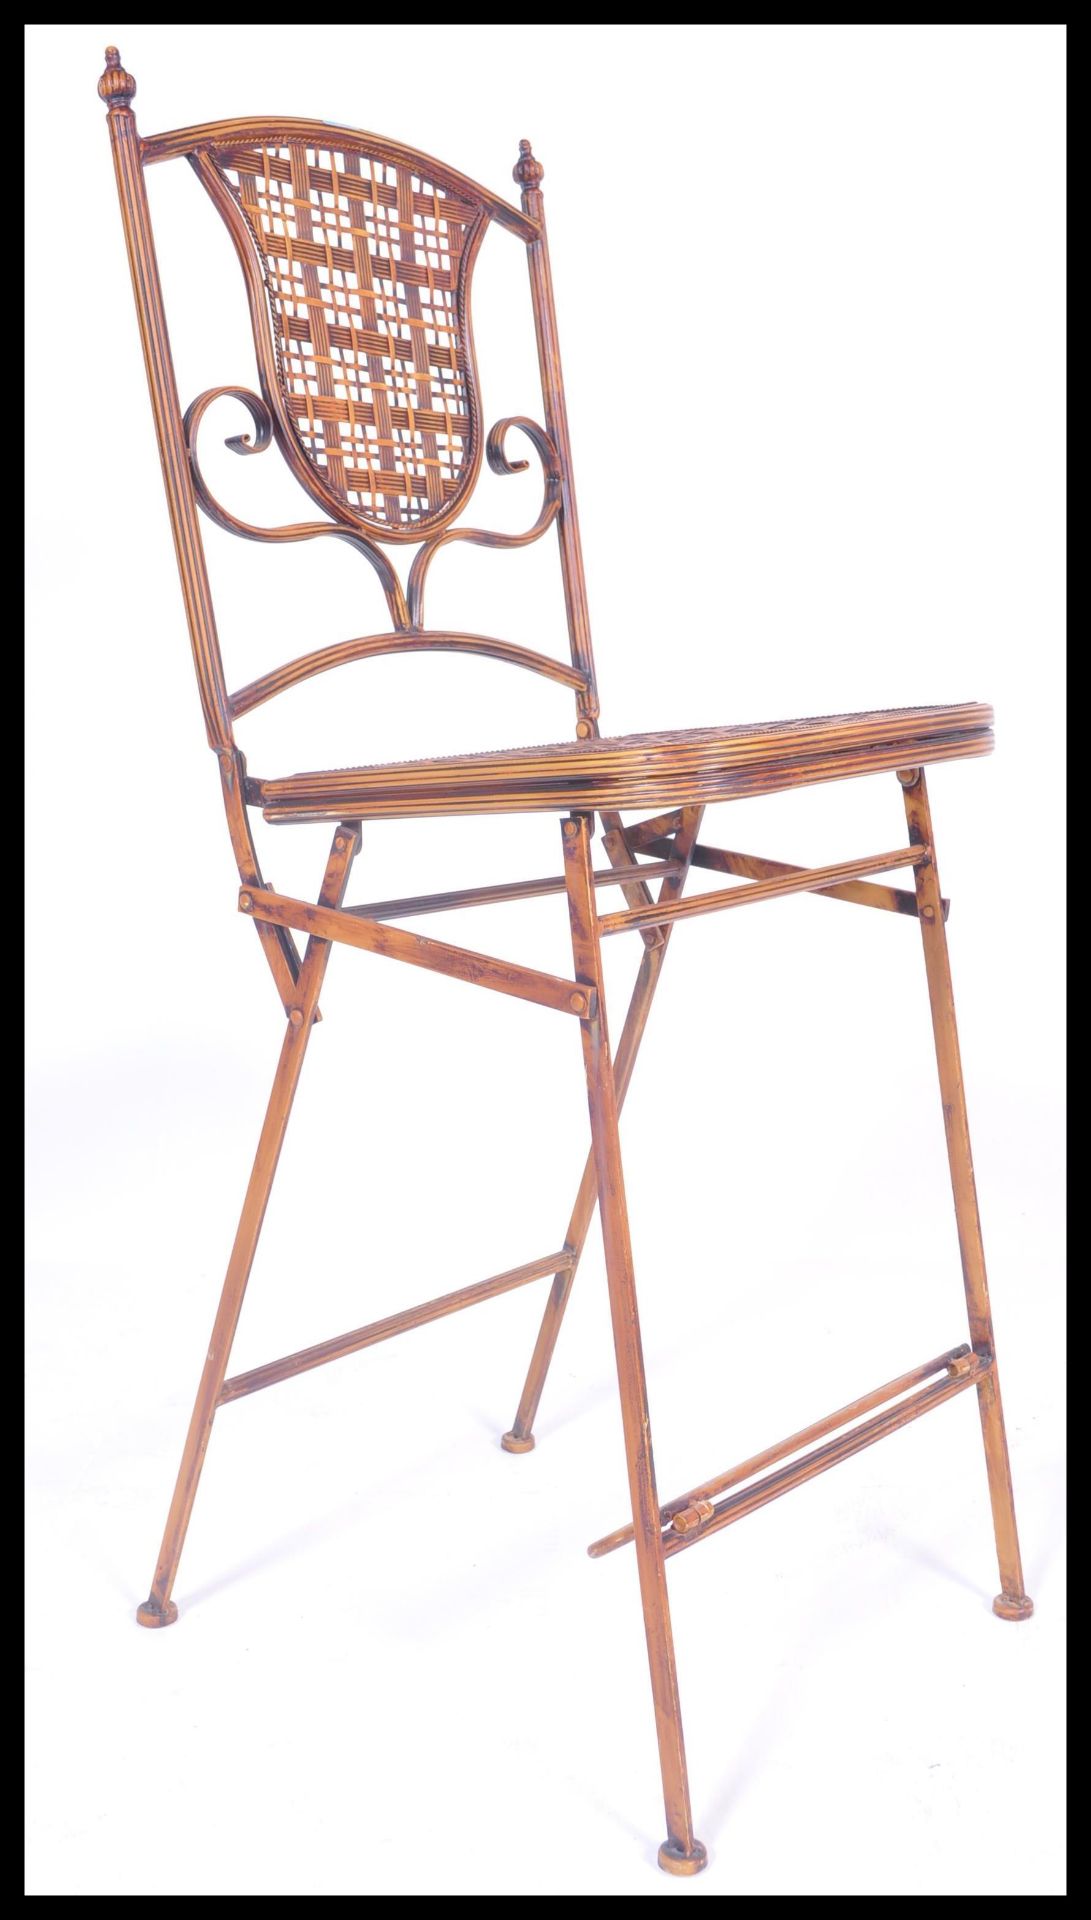 A 20th century country house style folding tennis umpires chair. The painted metal frame with